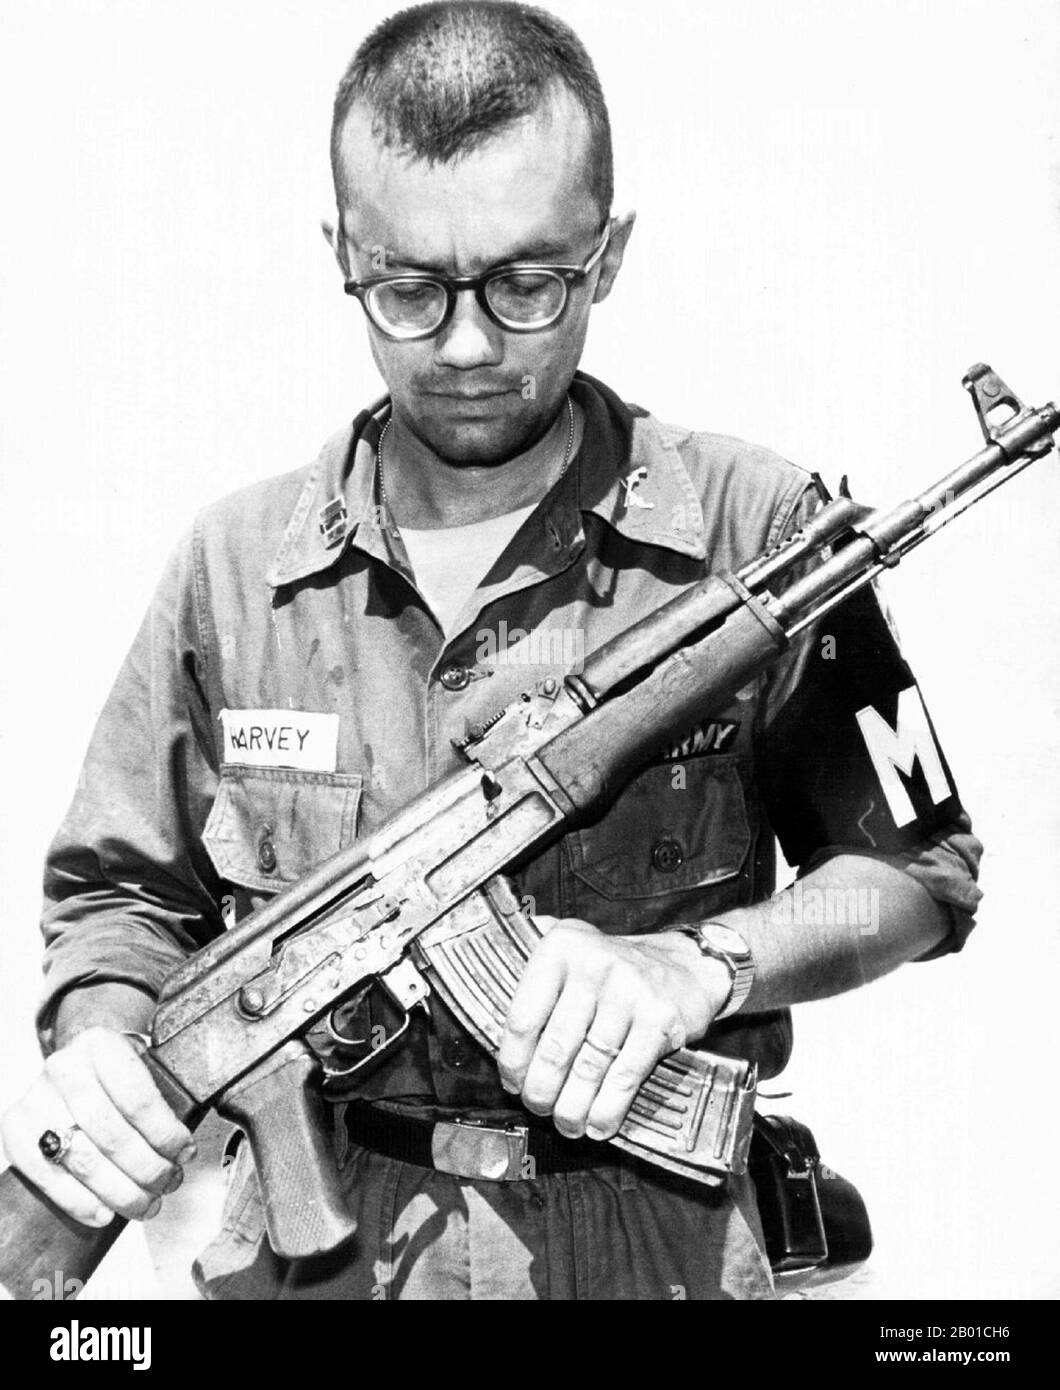 Vietnam: Captain Michael Harvey, US Army MP, inspects a captured National Liberation Front (Viet Cong) AK-47, 1968.  The AK-47 is a selective-fire, gas-operated 7.62×39mm assault rifle, first developed in the Soviet Union by Mikhail Kalashnikov. It is officially known as Avtomat Kalashnikova. It is also known as a Kalashnikov, an 'AK', or, in Russian slang, Kalash.  Design work on the AK-47 began in the last year of World War II (1945). After the war in 1946, the AK-46 was presented for official military trials. In 1947 the fixed-stock version was introduced into service with select units. Stock Photo